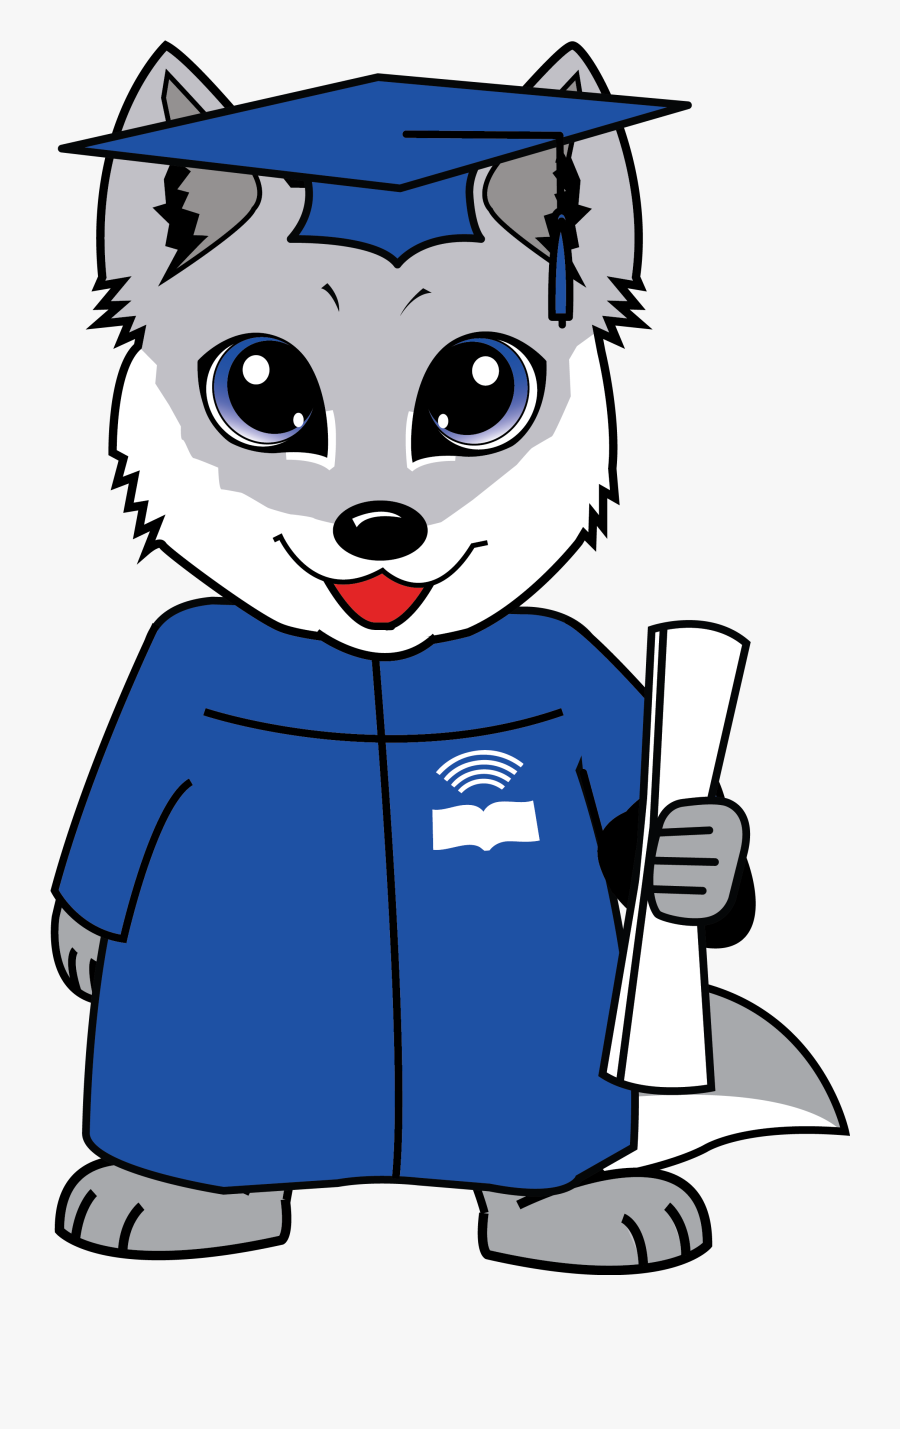 Wolfie In Cap And Gown Image - Cartoon, Transparent Clipart